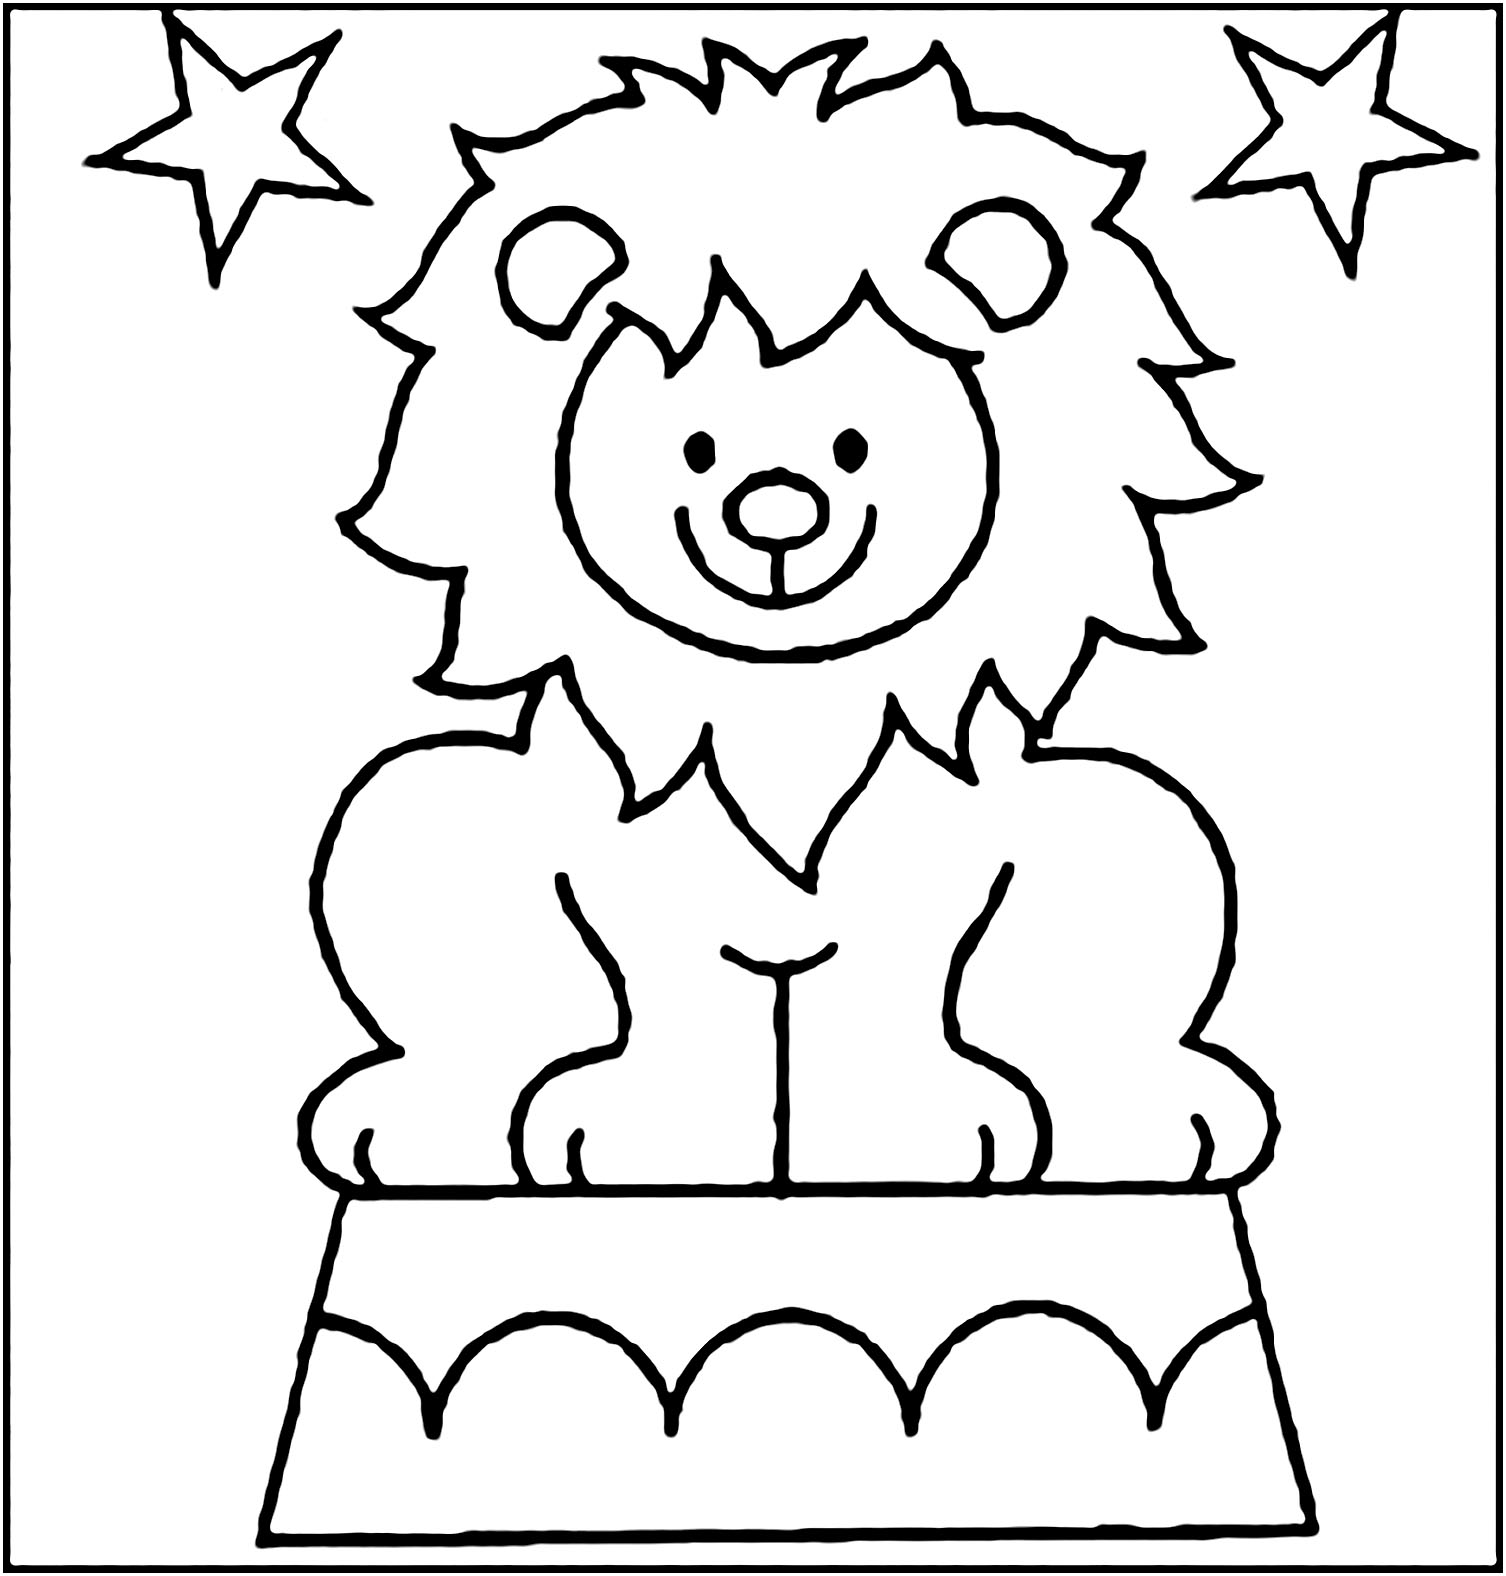 circus-theme-coloring-pages